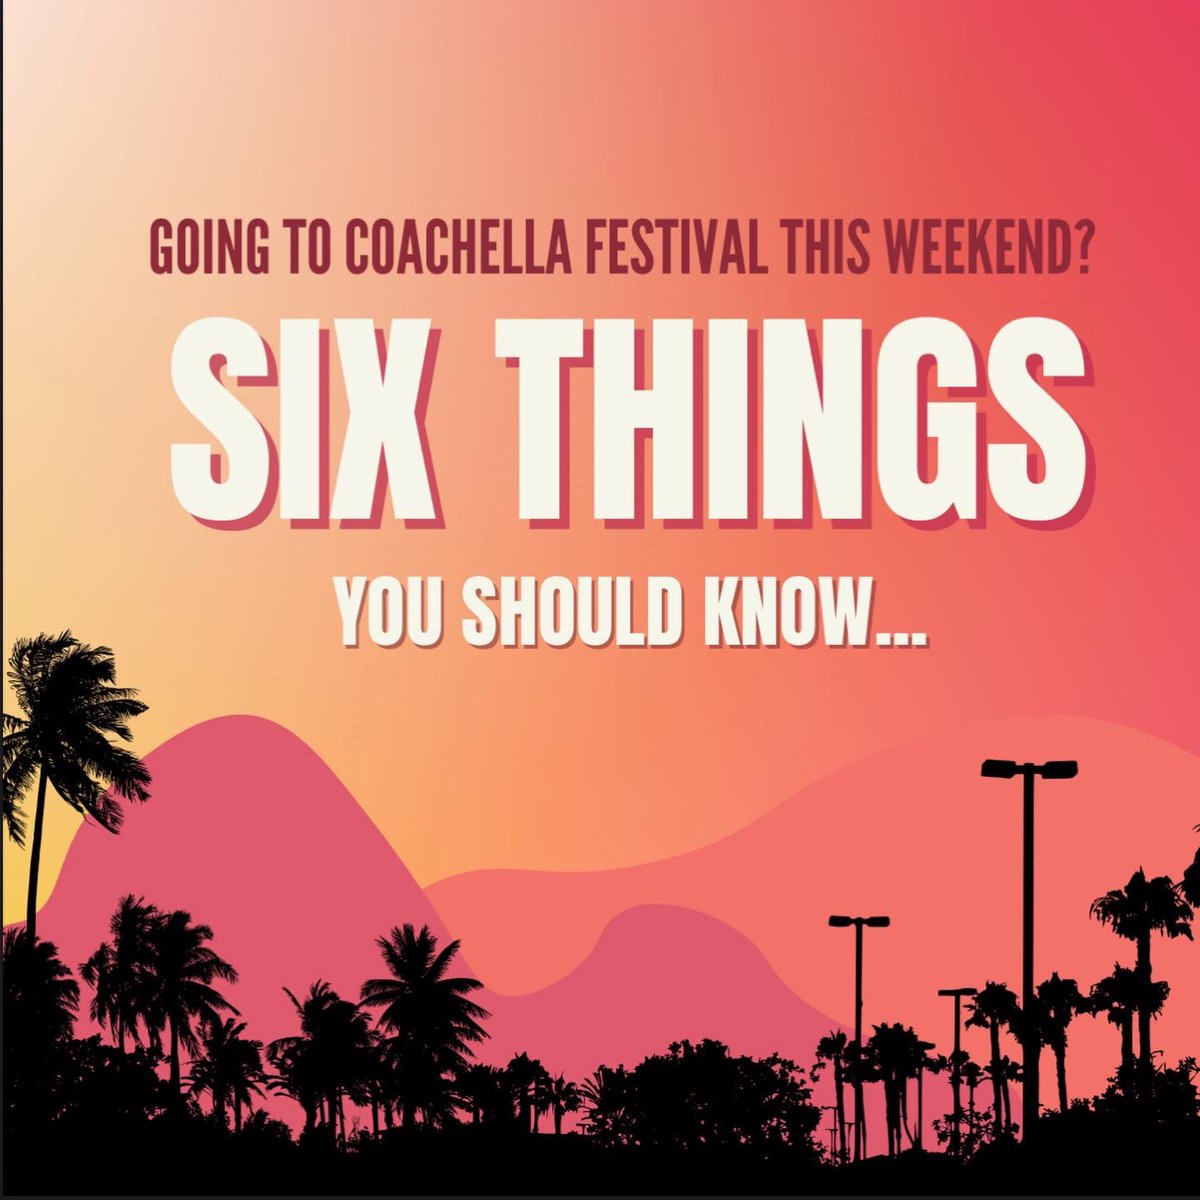 Are you going to @coachella festival this weekend or tuning in to your favorite artists? There are six things you should know. 🧵 1/6 #Coachella #Coachella2022